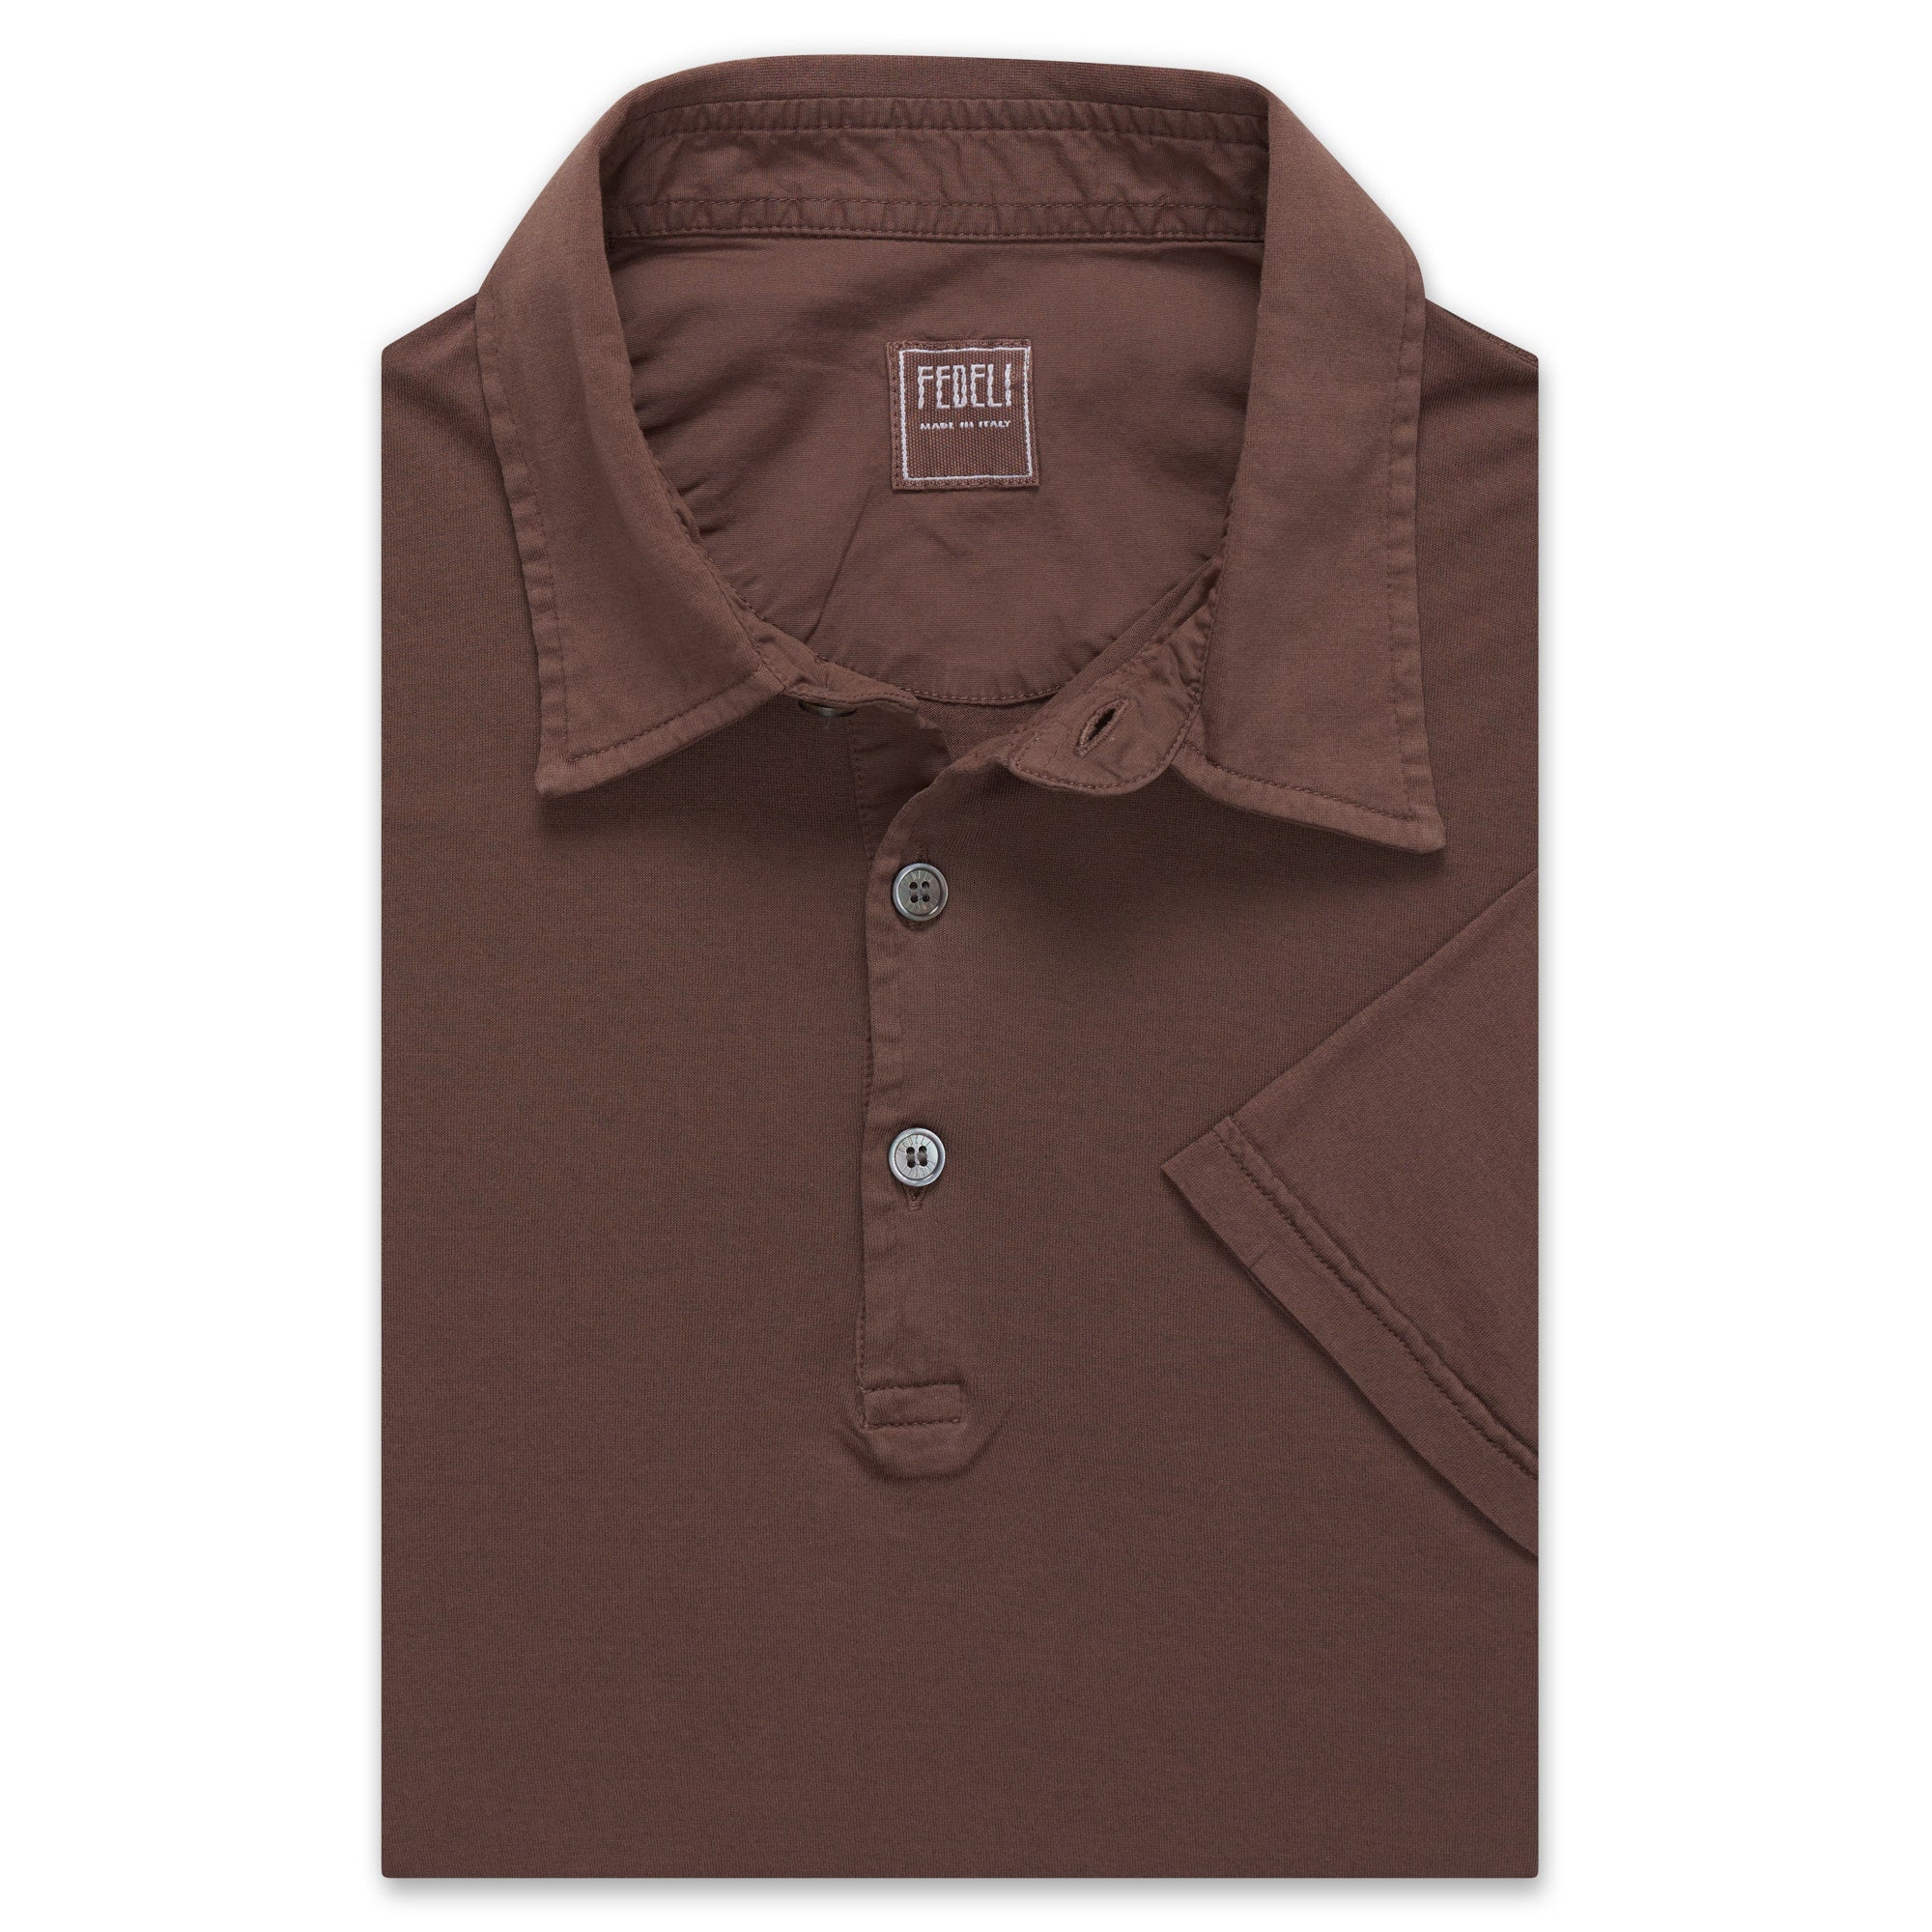 FEDELI "Jack" Solid Brown Superlight Jersey Cotton Short Sleeve Polo Shirt 46 NEW XS